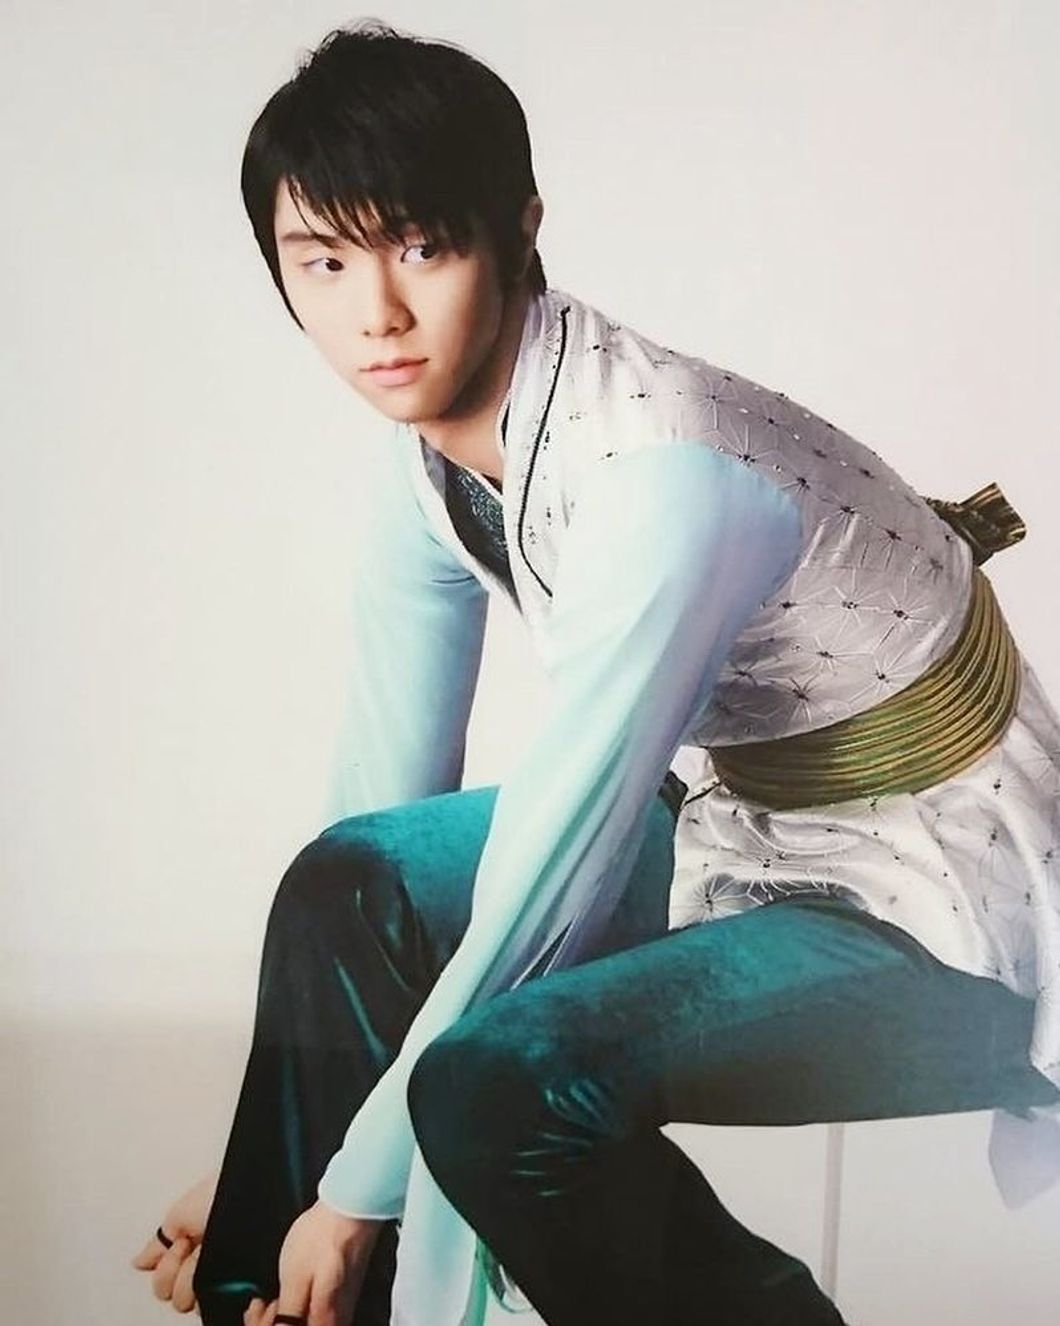 Yuzuru Hanyu Skated Into My Heart, And I Don't Think That Will Ever Change